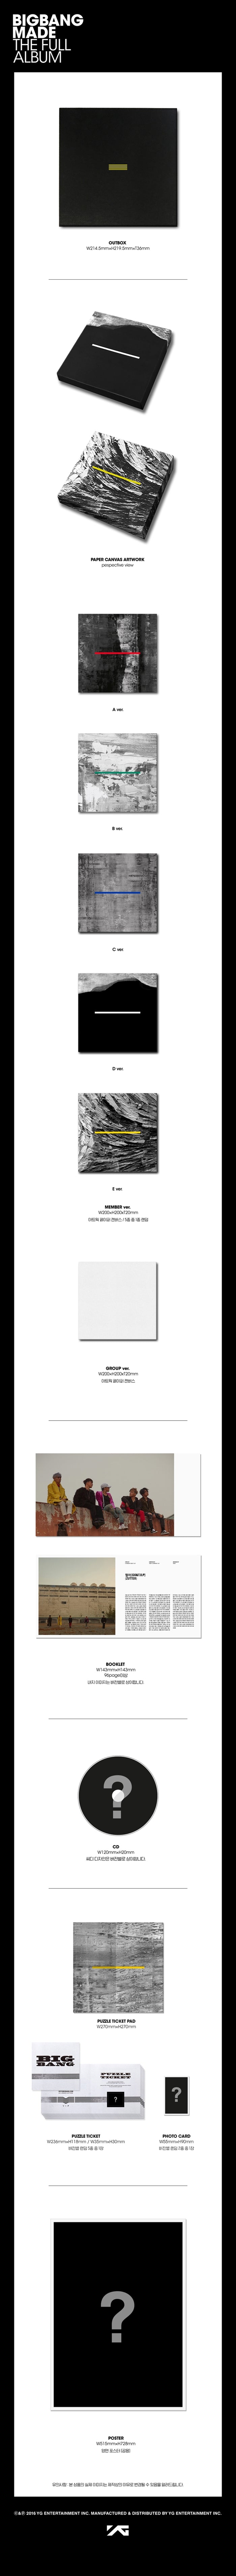 BIGBANG MADE THE FULL ALBUM The end of 'MADE SERIES' and the final decoration of the 10th anniversary project, 'MADE' regu...